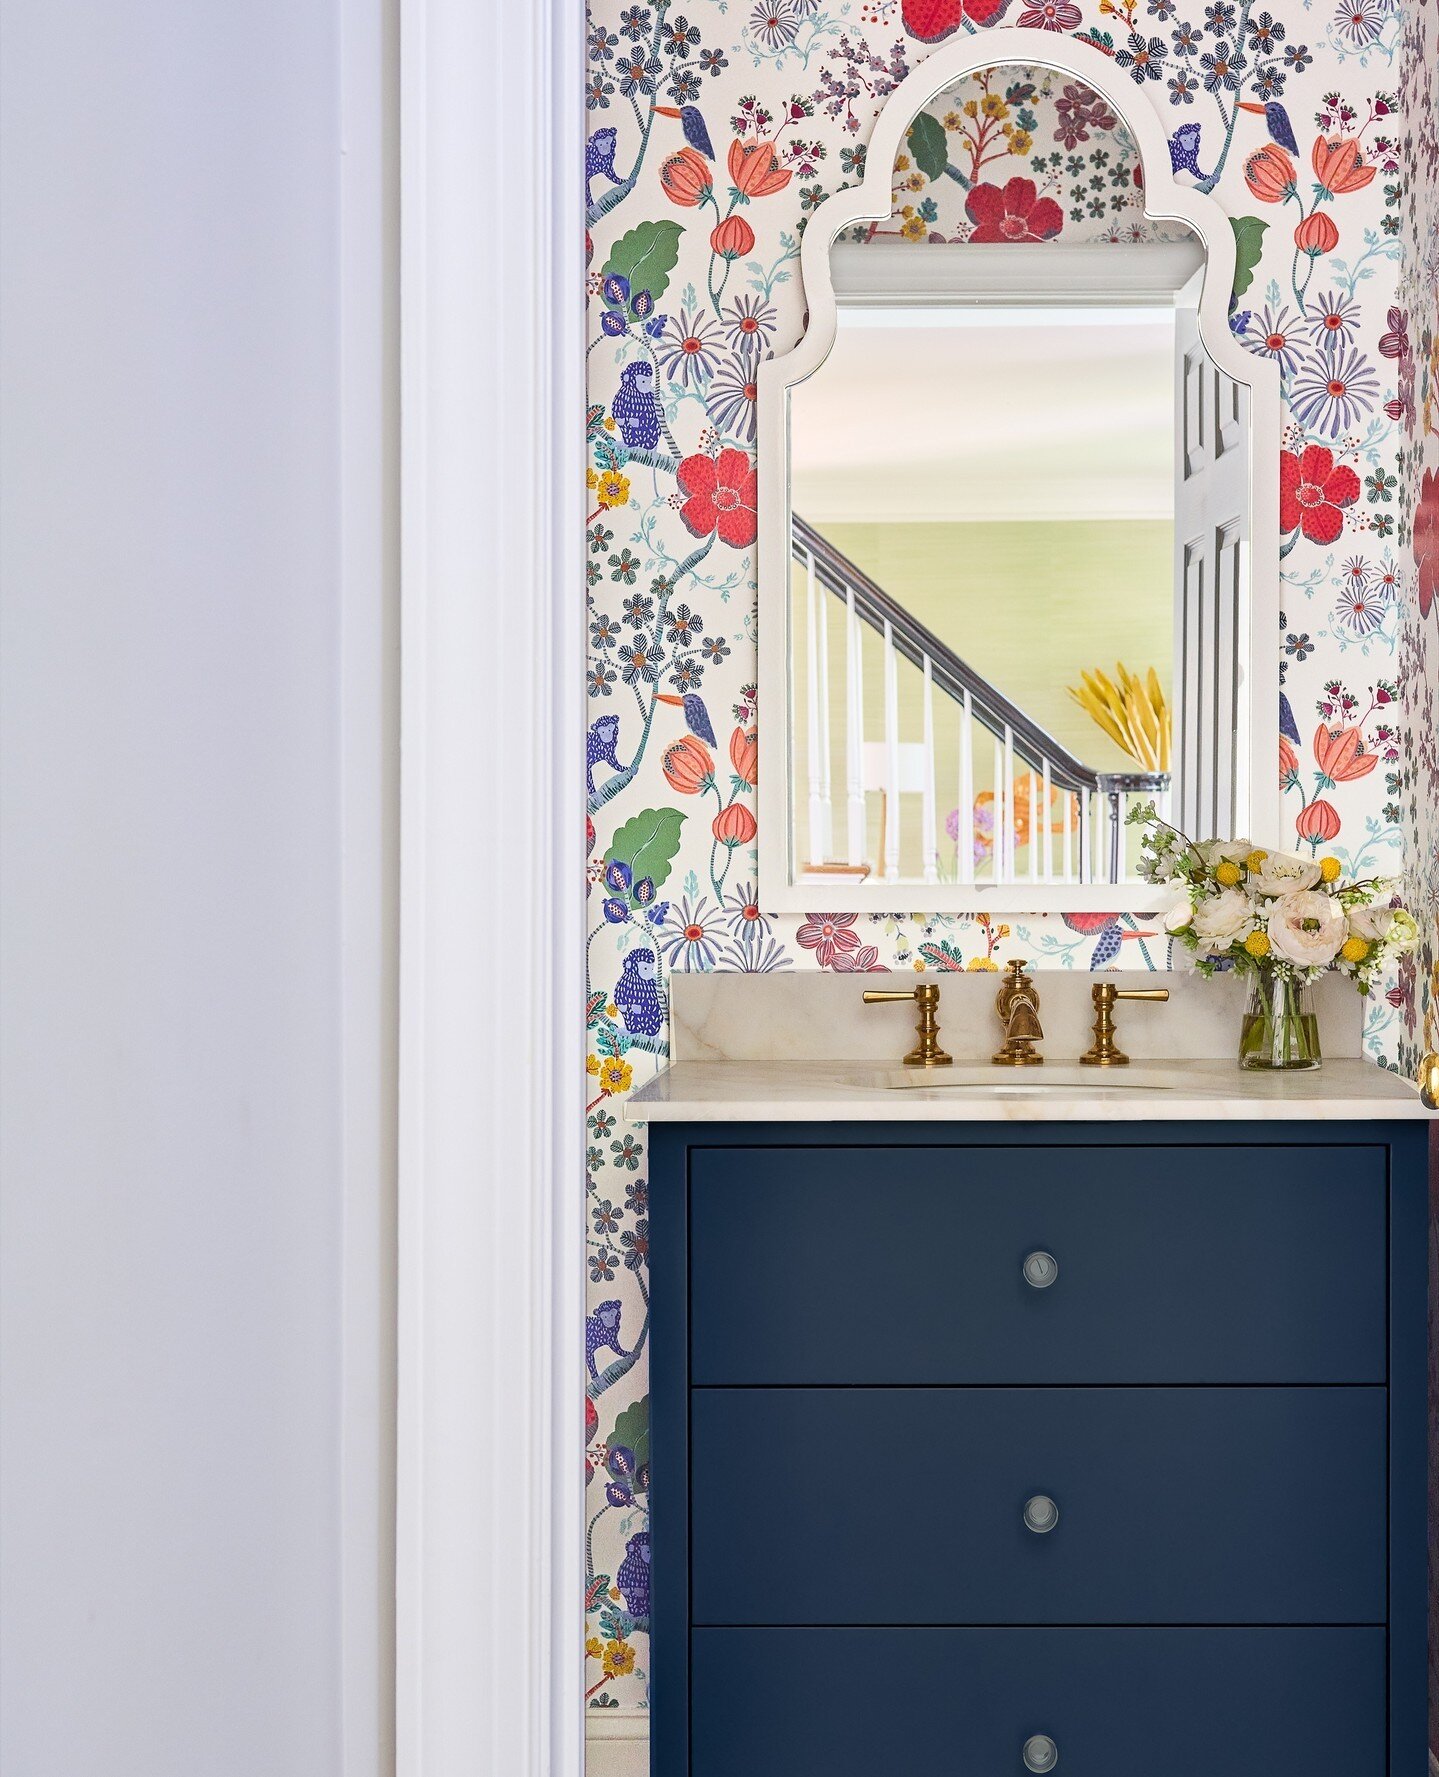 A pretty little moment from our latest project Southport Chic, we can't wait to share the rest with you! ⁠
⁠
Photography @janebeilesphoto⁠
⁠
#powderroom #wallpaperwednesday #powderroomdesign #mossdesignct